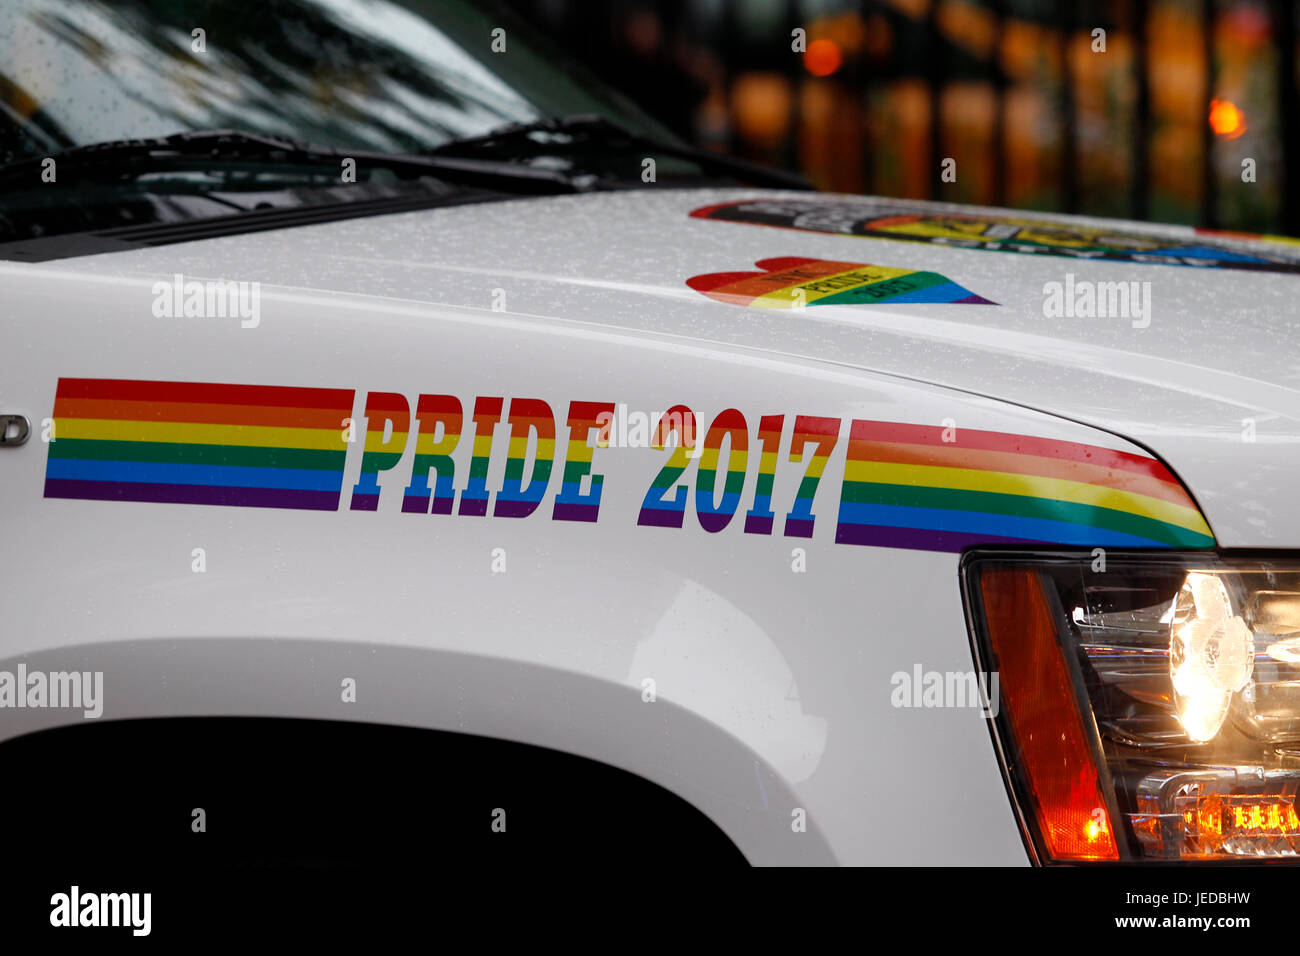 New York, USA. 23rd June, 2017. A police cruiser, in rainbow trim, stands guard in front of the Stonewall Inn in New York City's Greenwich Village where the Gay Pride movement was born, following a series of demonstrations in response to a police raid of the bar in 1969.  People are flocking to the site, now a National Monument, as Gay Pride events get underway in New York City this weekend, including Sunday's Pride march. Credit: Adam Stoltman/Alamy Live News Stock Photo